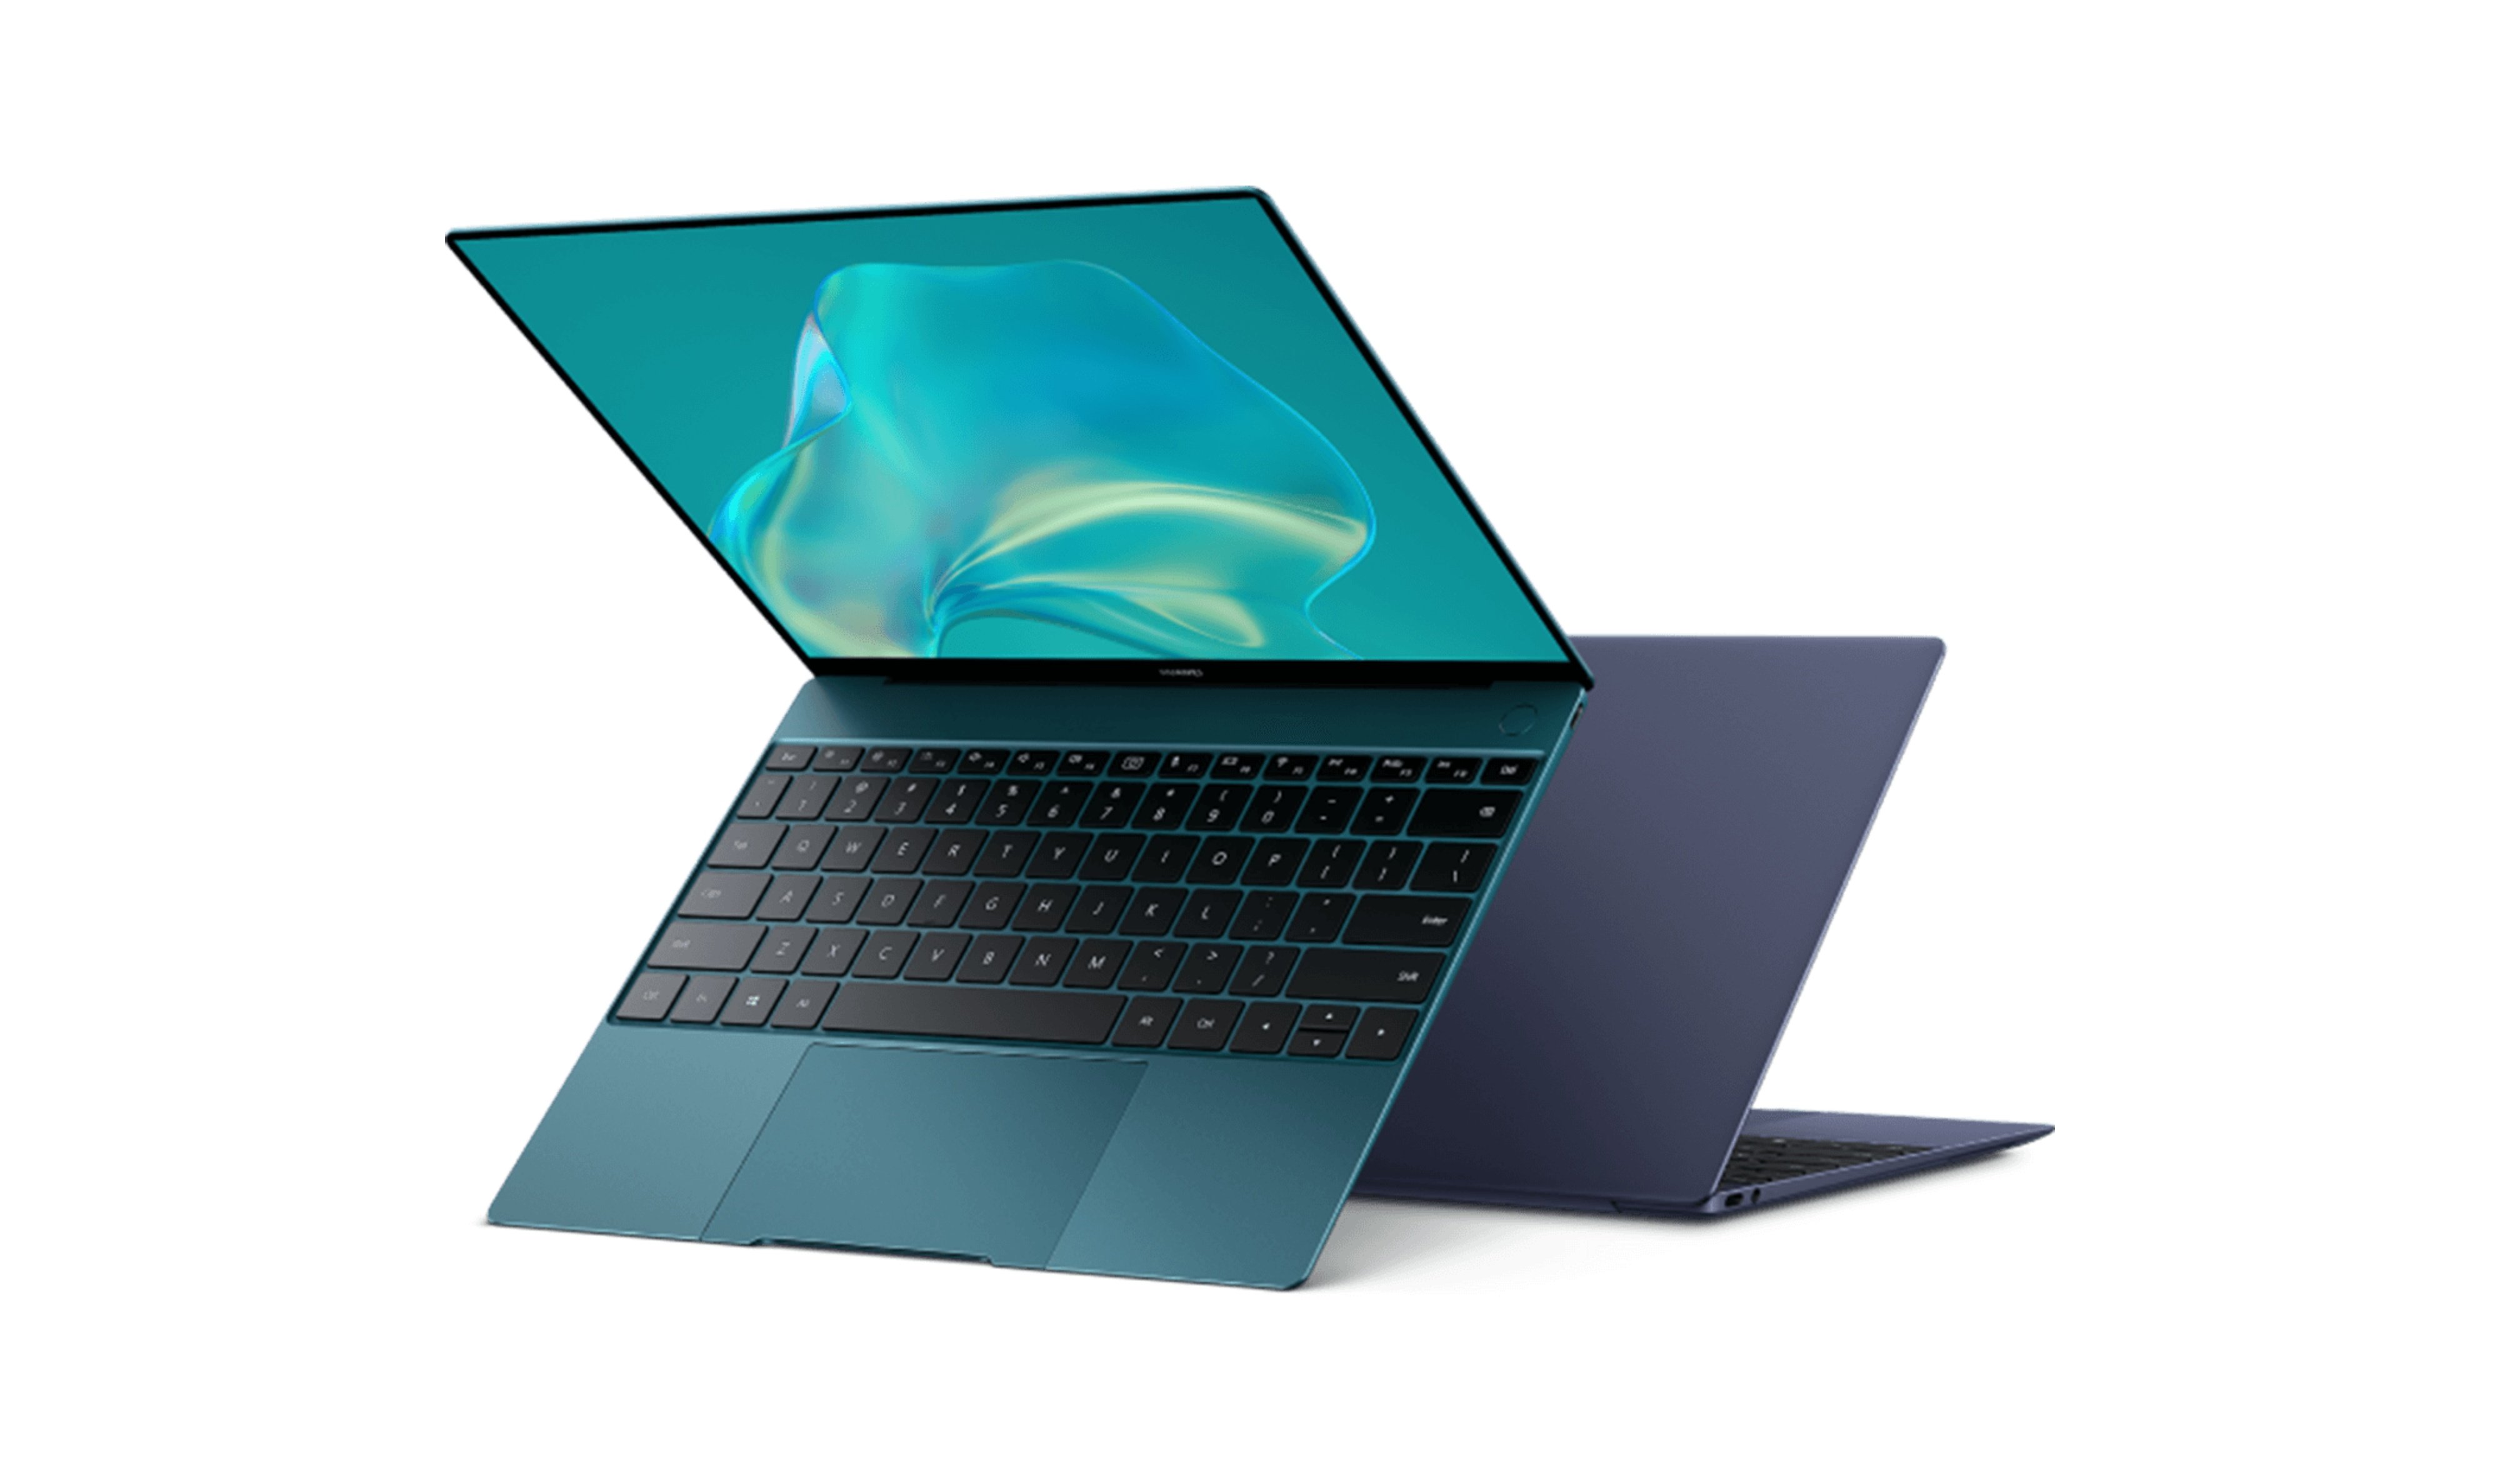 Huawei laptop powered by Intel's 11th-gen processor gets benchmarked; might be a new MateBook X